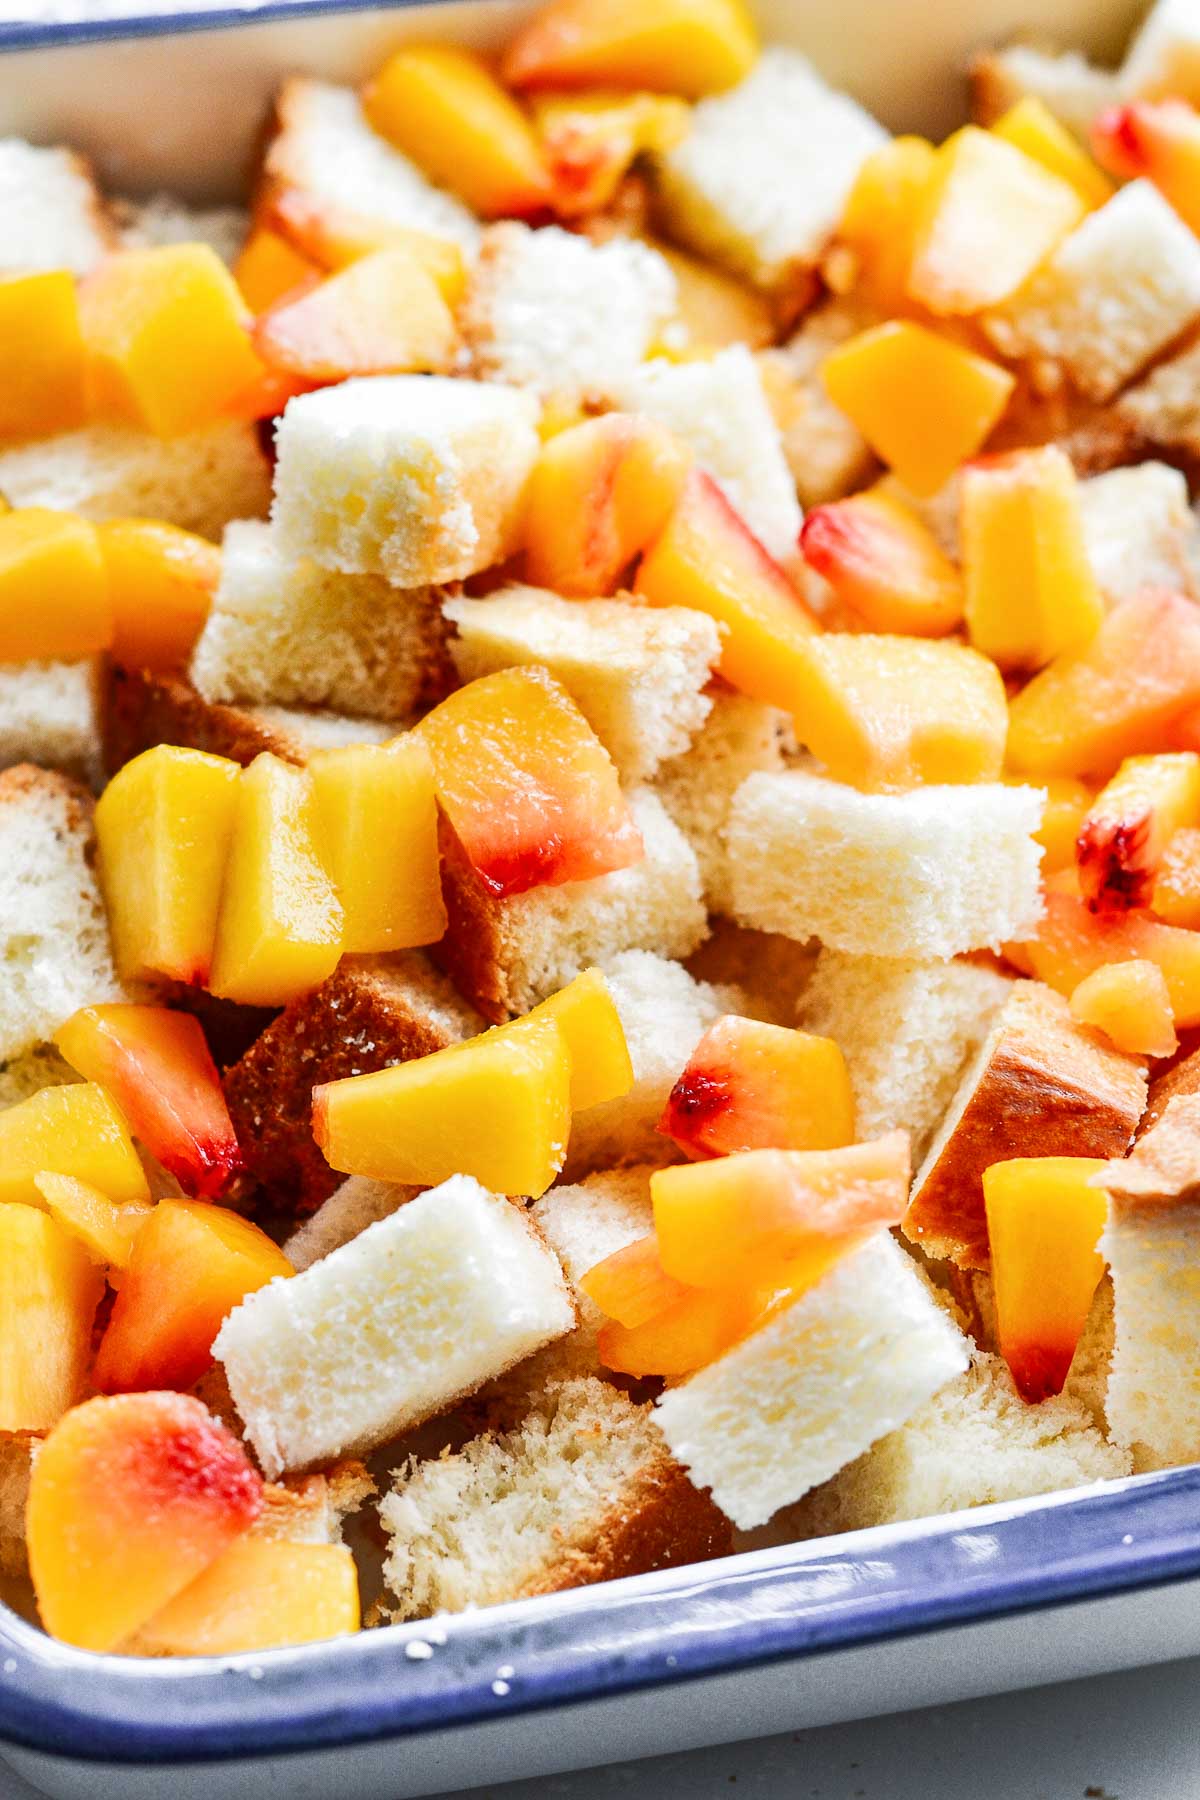 Diced peaches and cubed bread in a baking pan